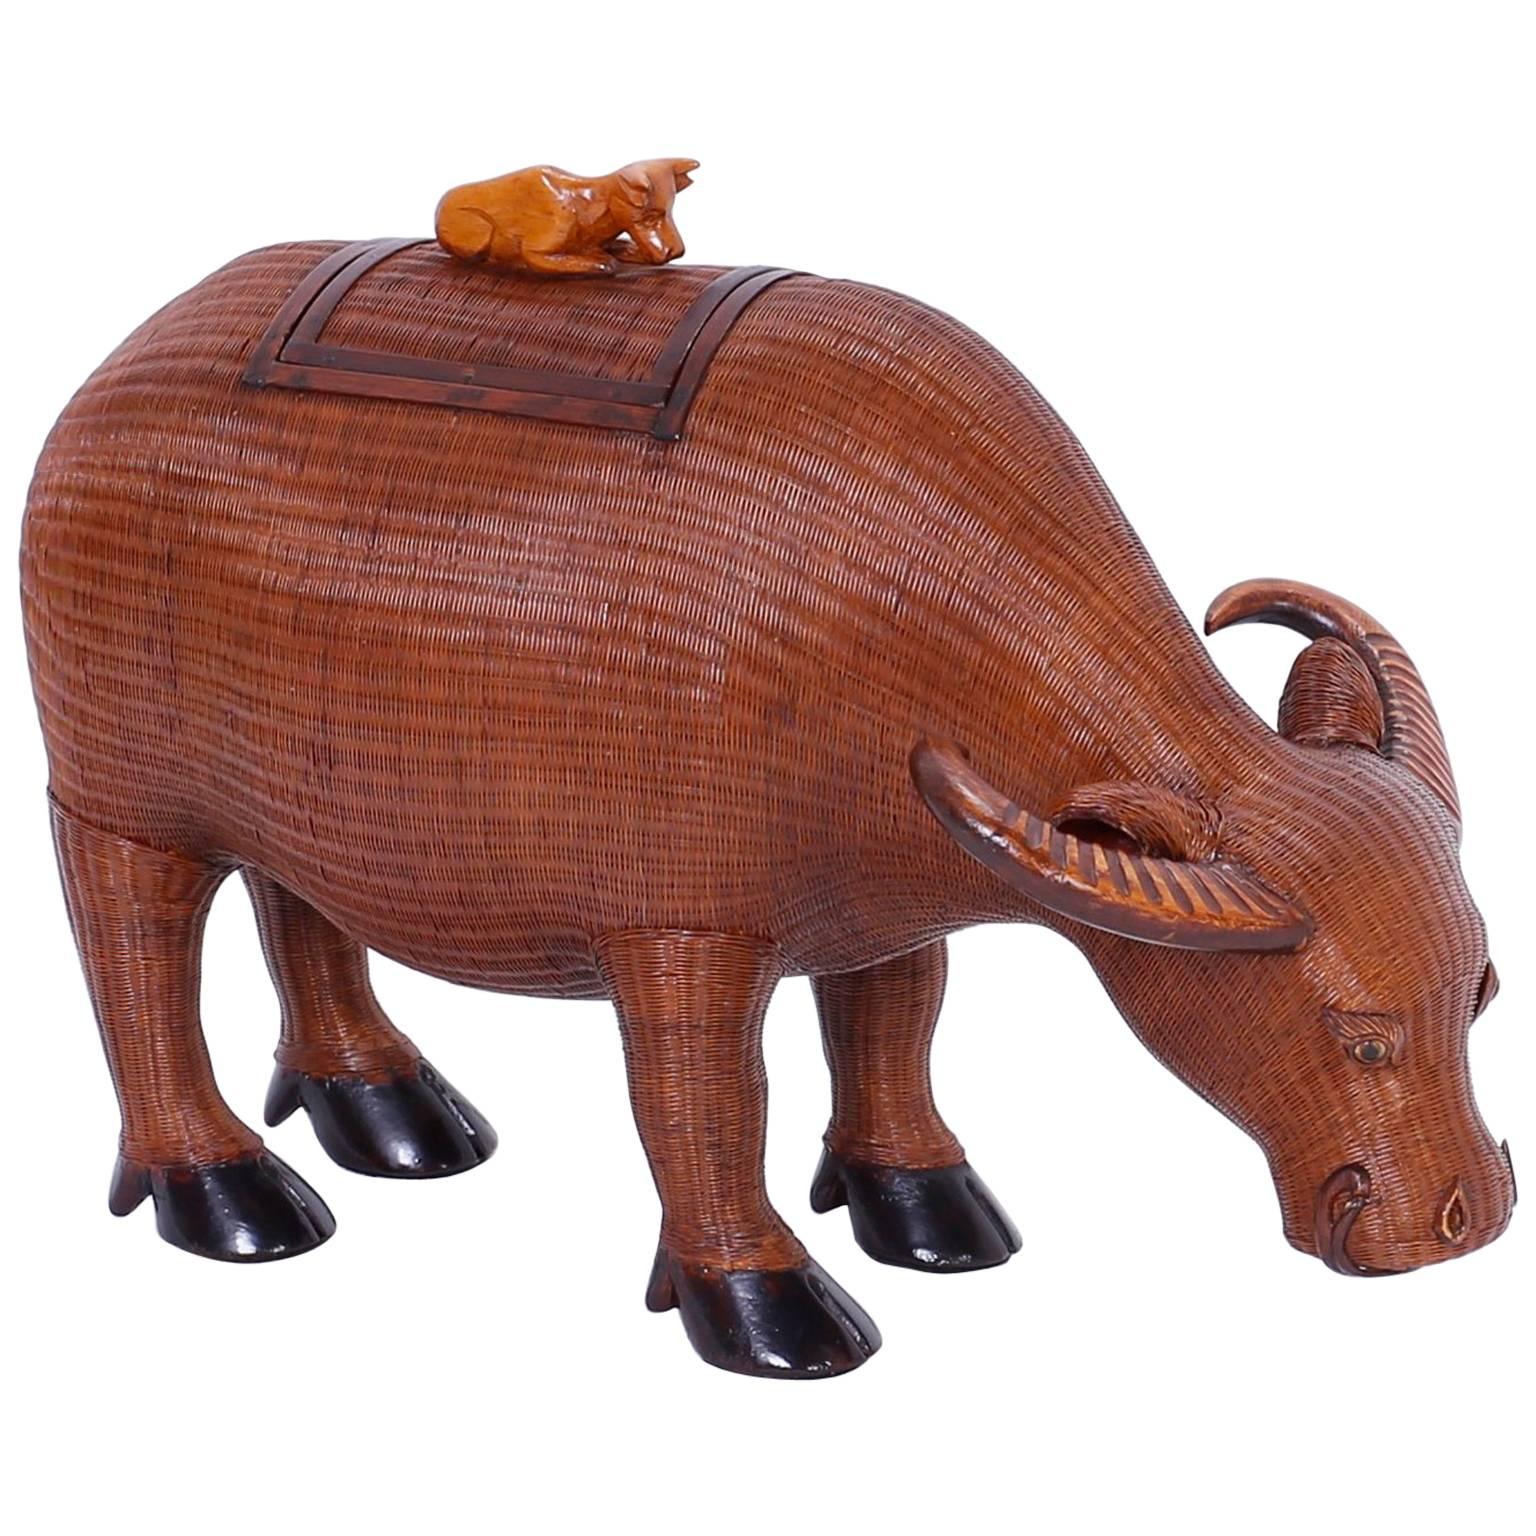 Traditional Chinese Wicker and Wood Lidded Ox Box